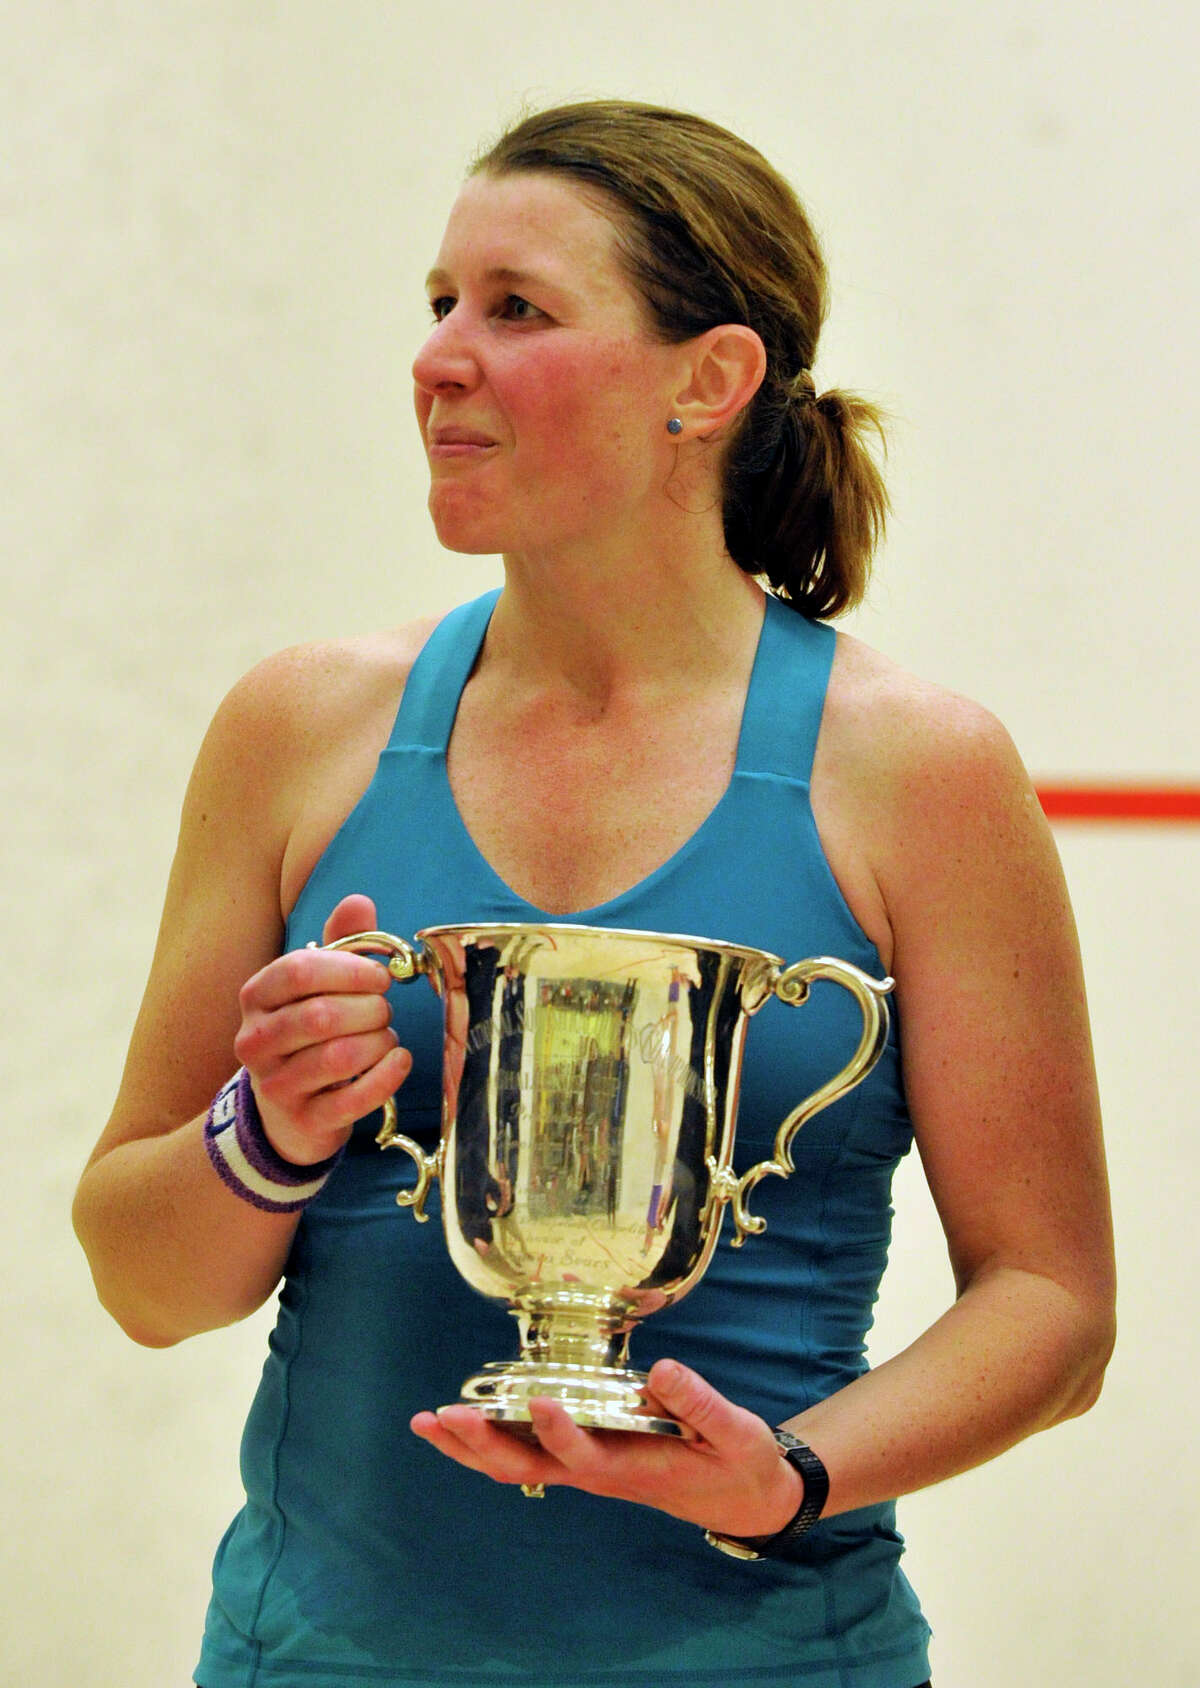 Greenwich resident Natalie Grainger celebrates her win during the finals of the U.S. Womens Squash Championships at Chelsea Piers in Stamford on Sunday, March 10, 2013.